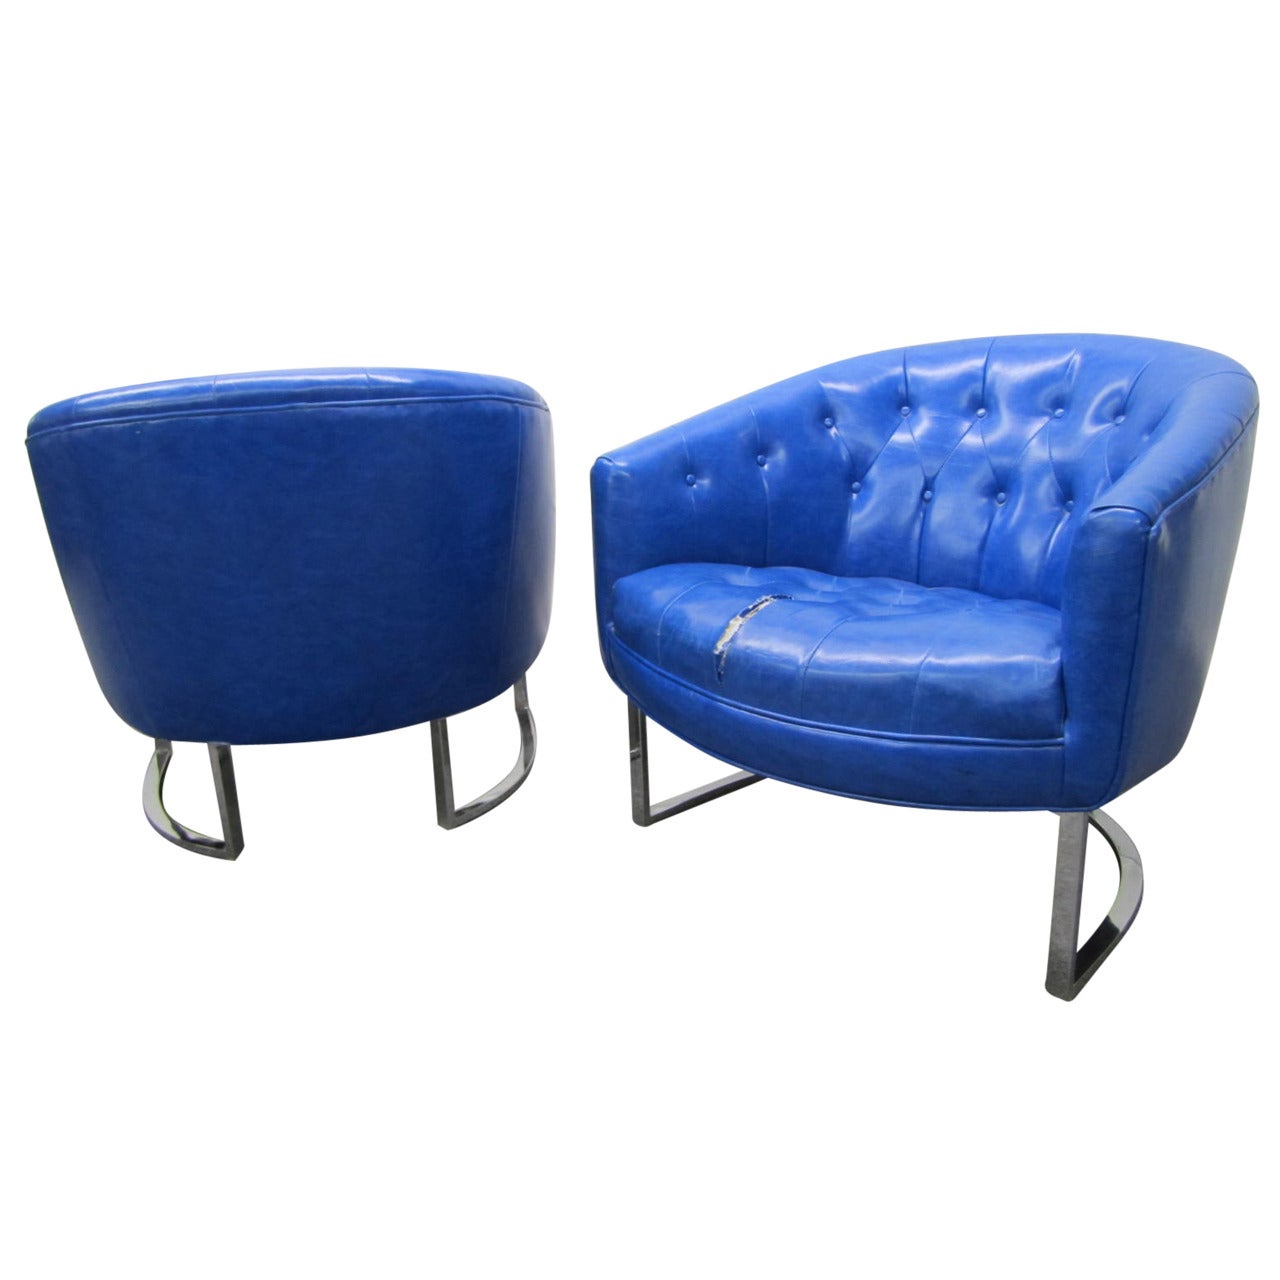 Stunning Pair Milo Baughman style Barrel Back Chrome Lounge Chairs, Mid-Century For Sale